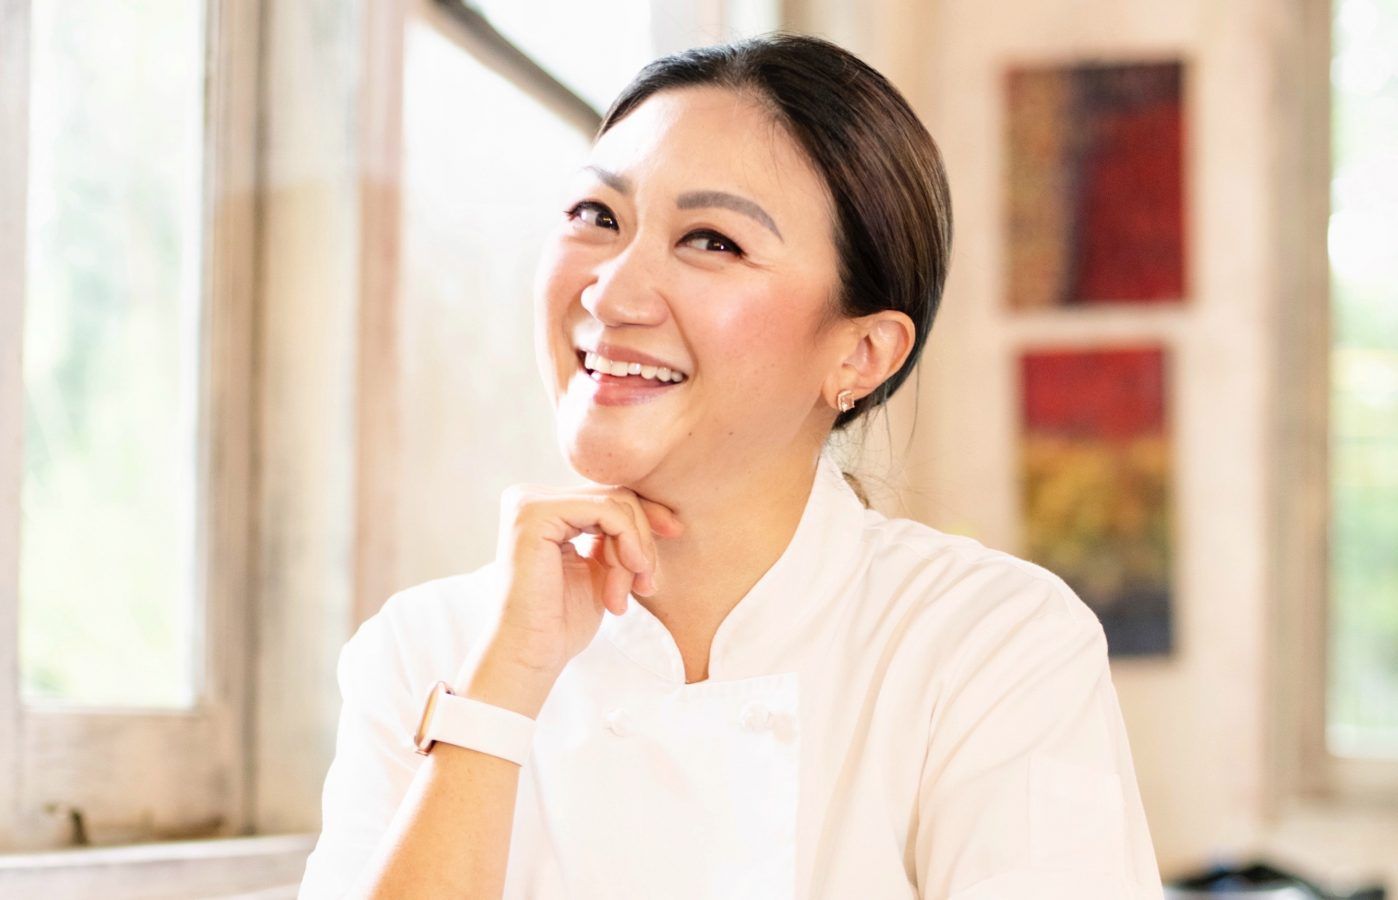 Taste of Tradition: Morsels’ Petrina Loh shares her Heng Hwa Pah Mee recipe